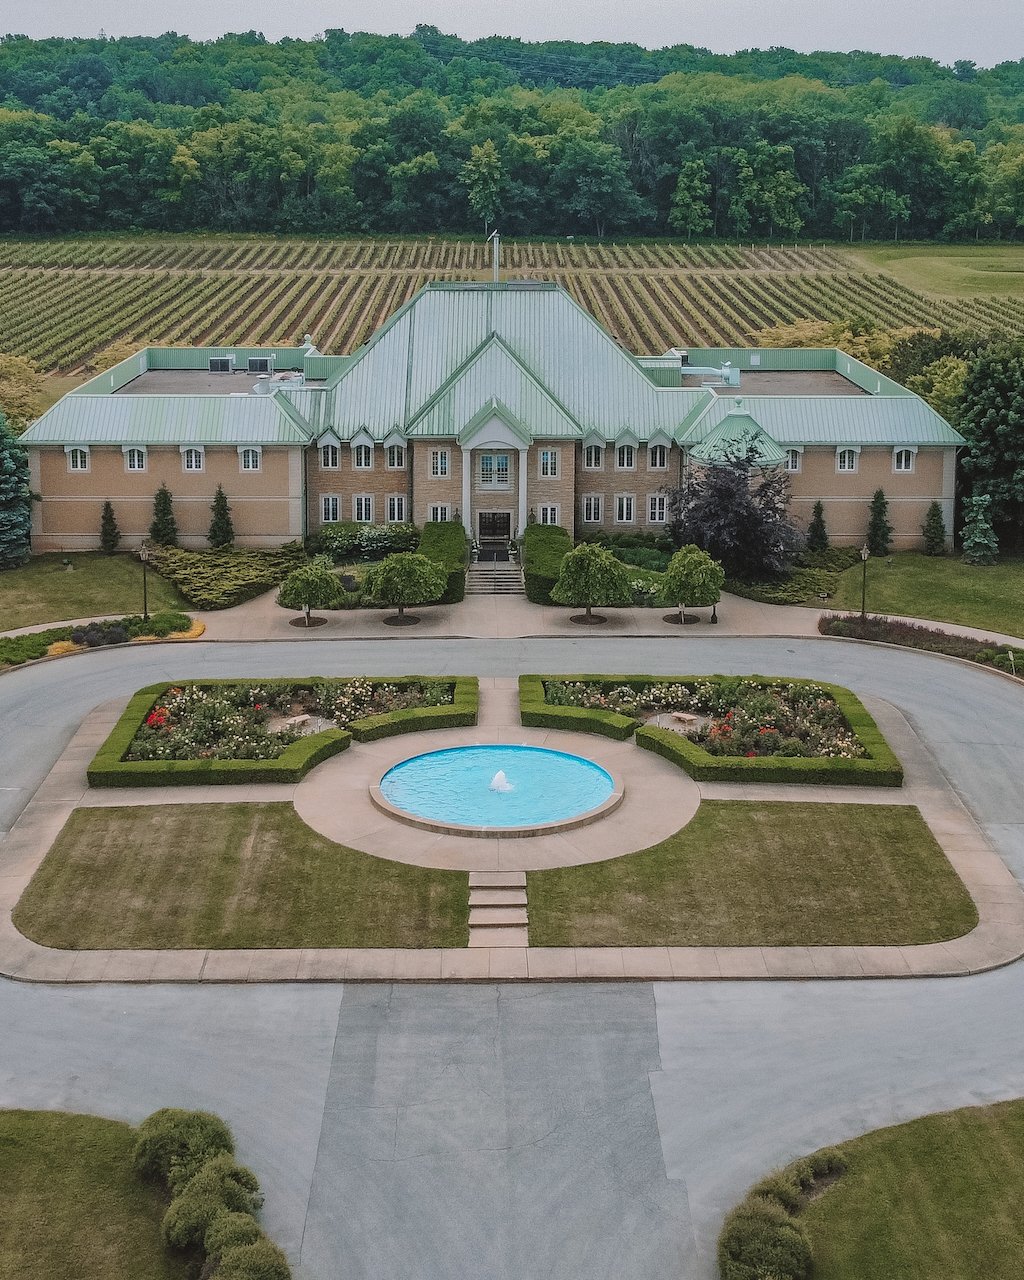 The entrance and fountain at Château des Charmes - Niagara-On-The-Lake - Ontario - Canada